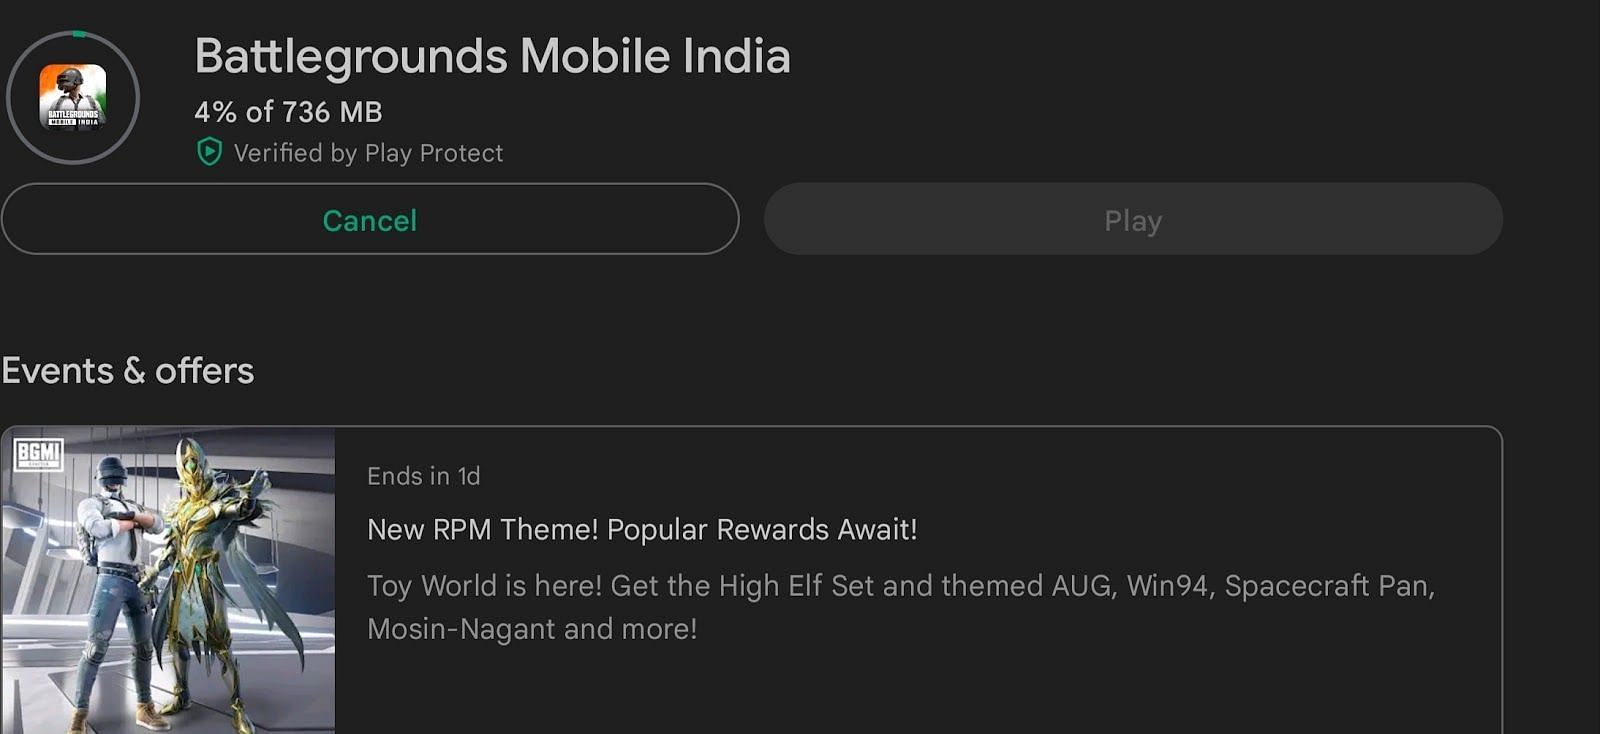 Battlegrounds Mobile India 2.1 has a total file size of 736 MB on the Play Store (Image via Google Play Store)